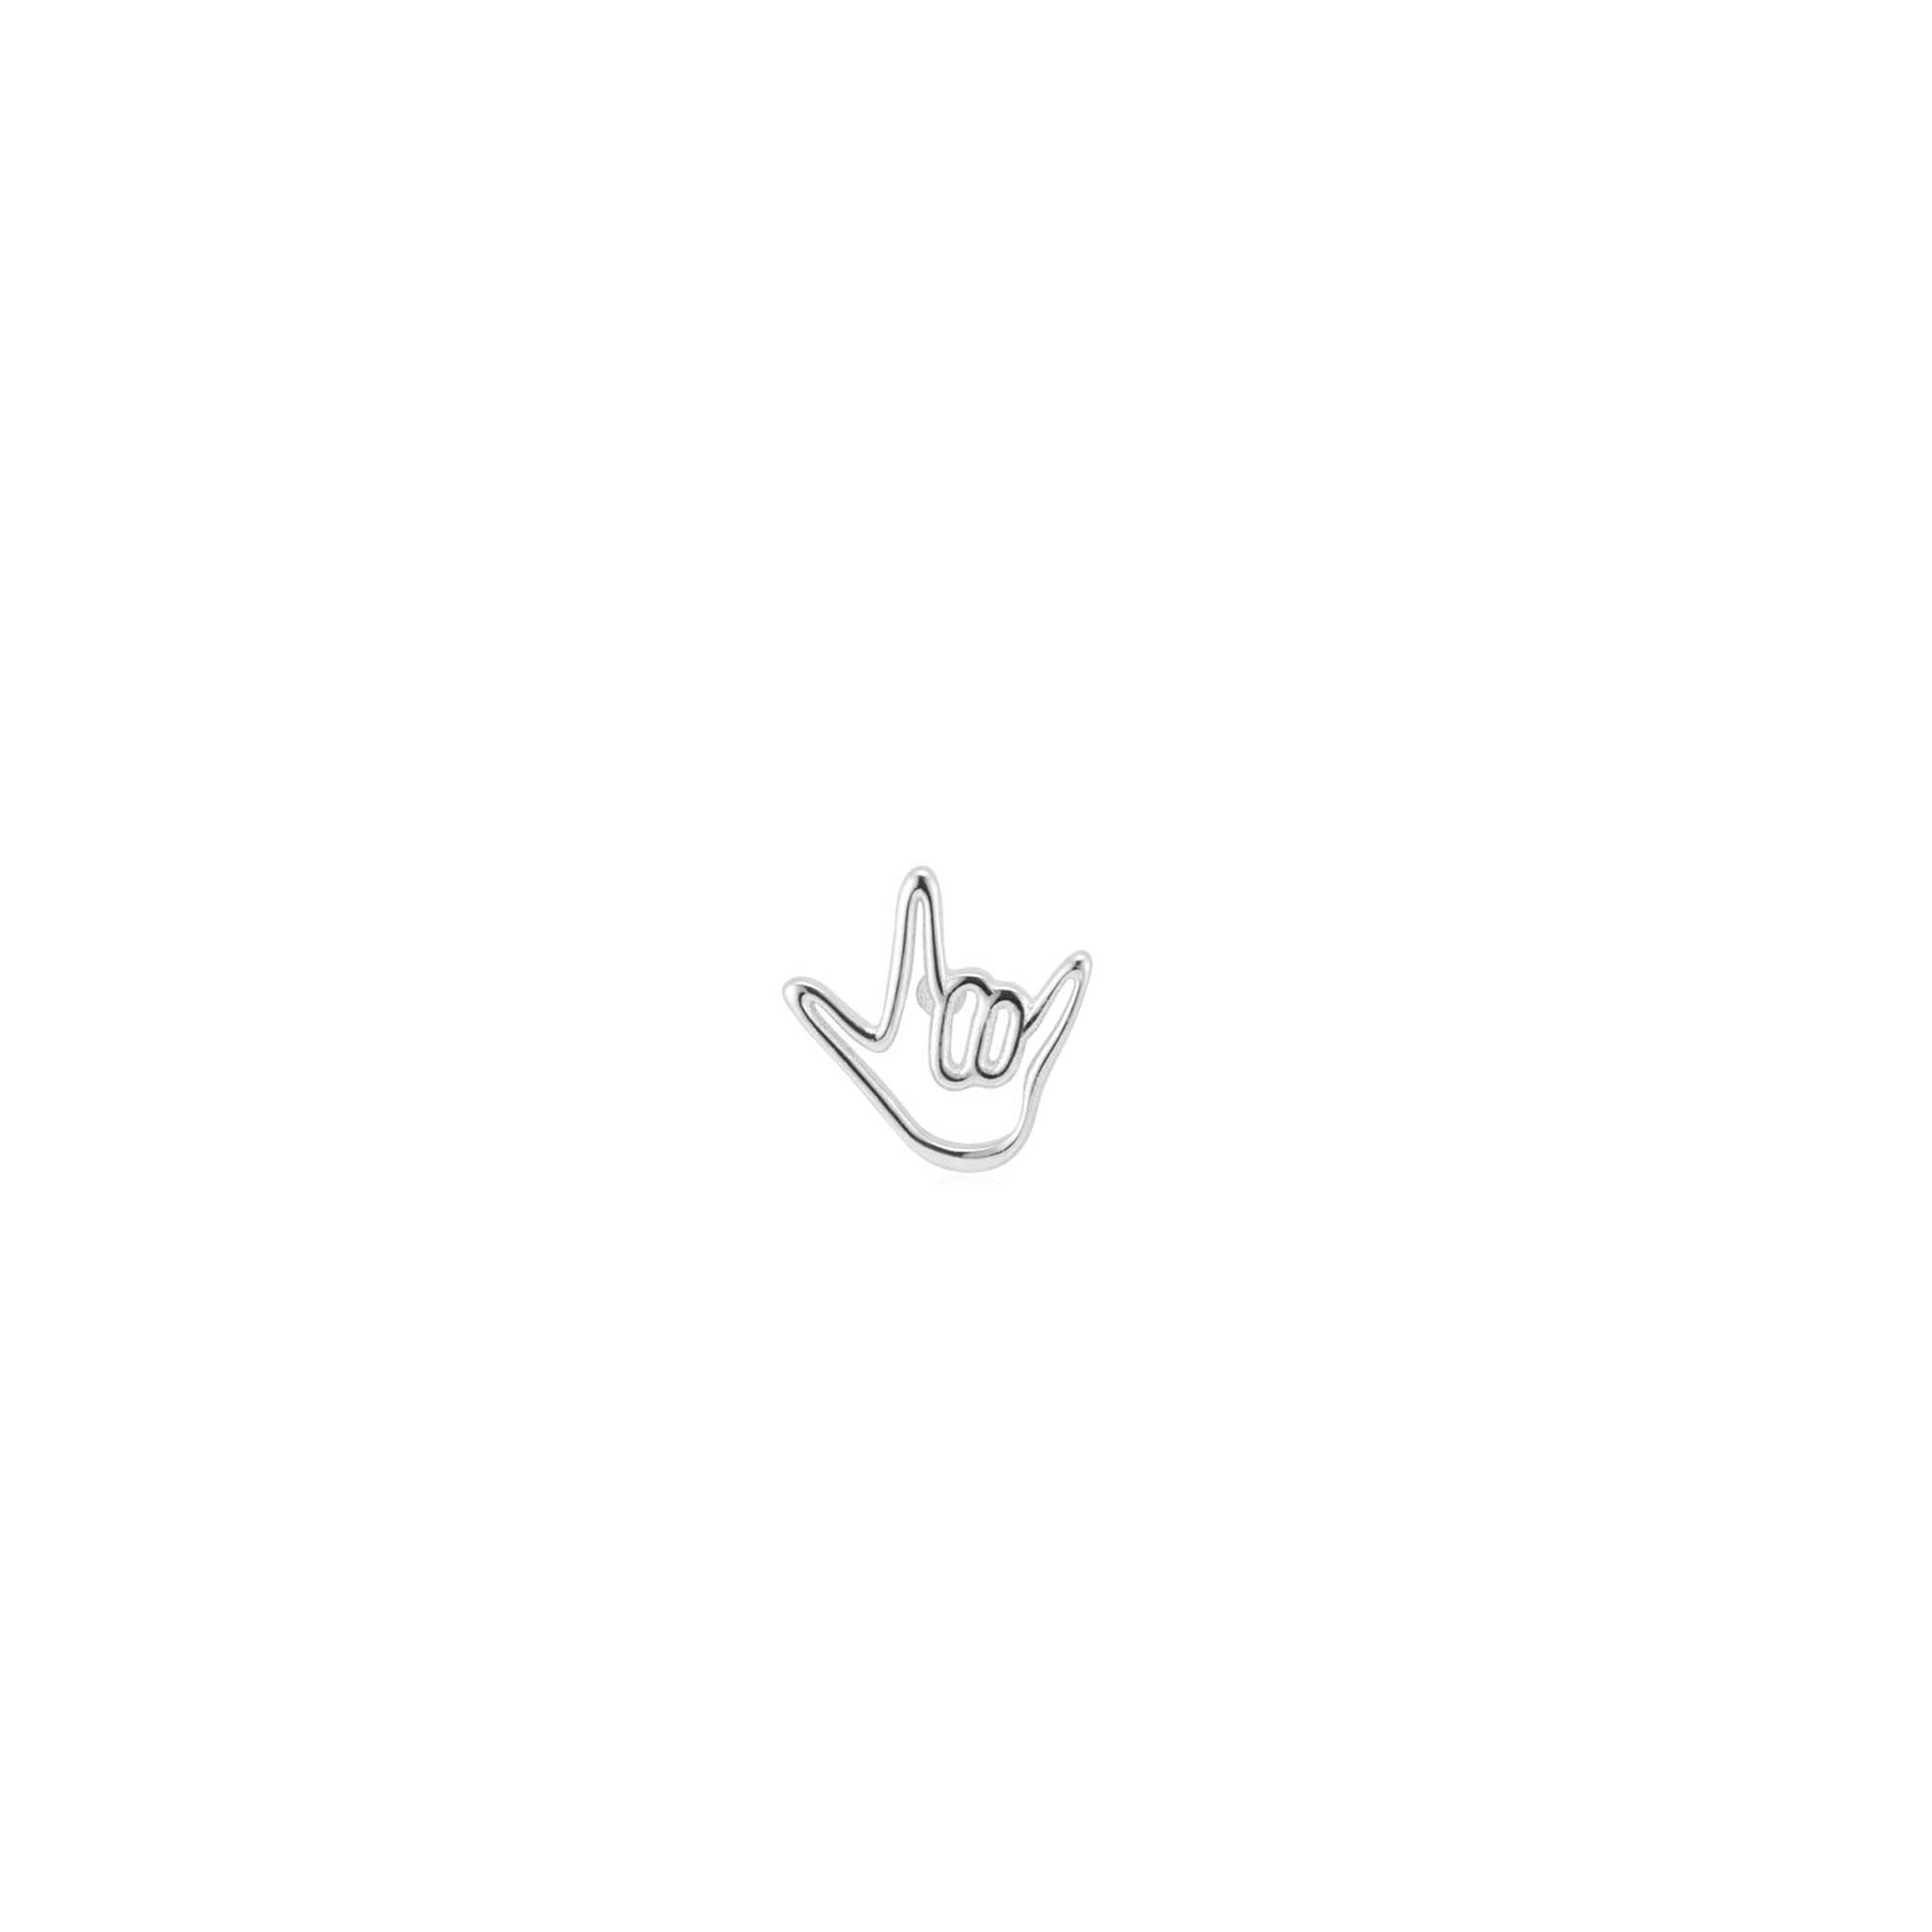 LOVE SIGN SILVER PIN